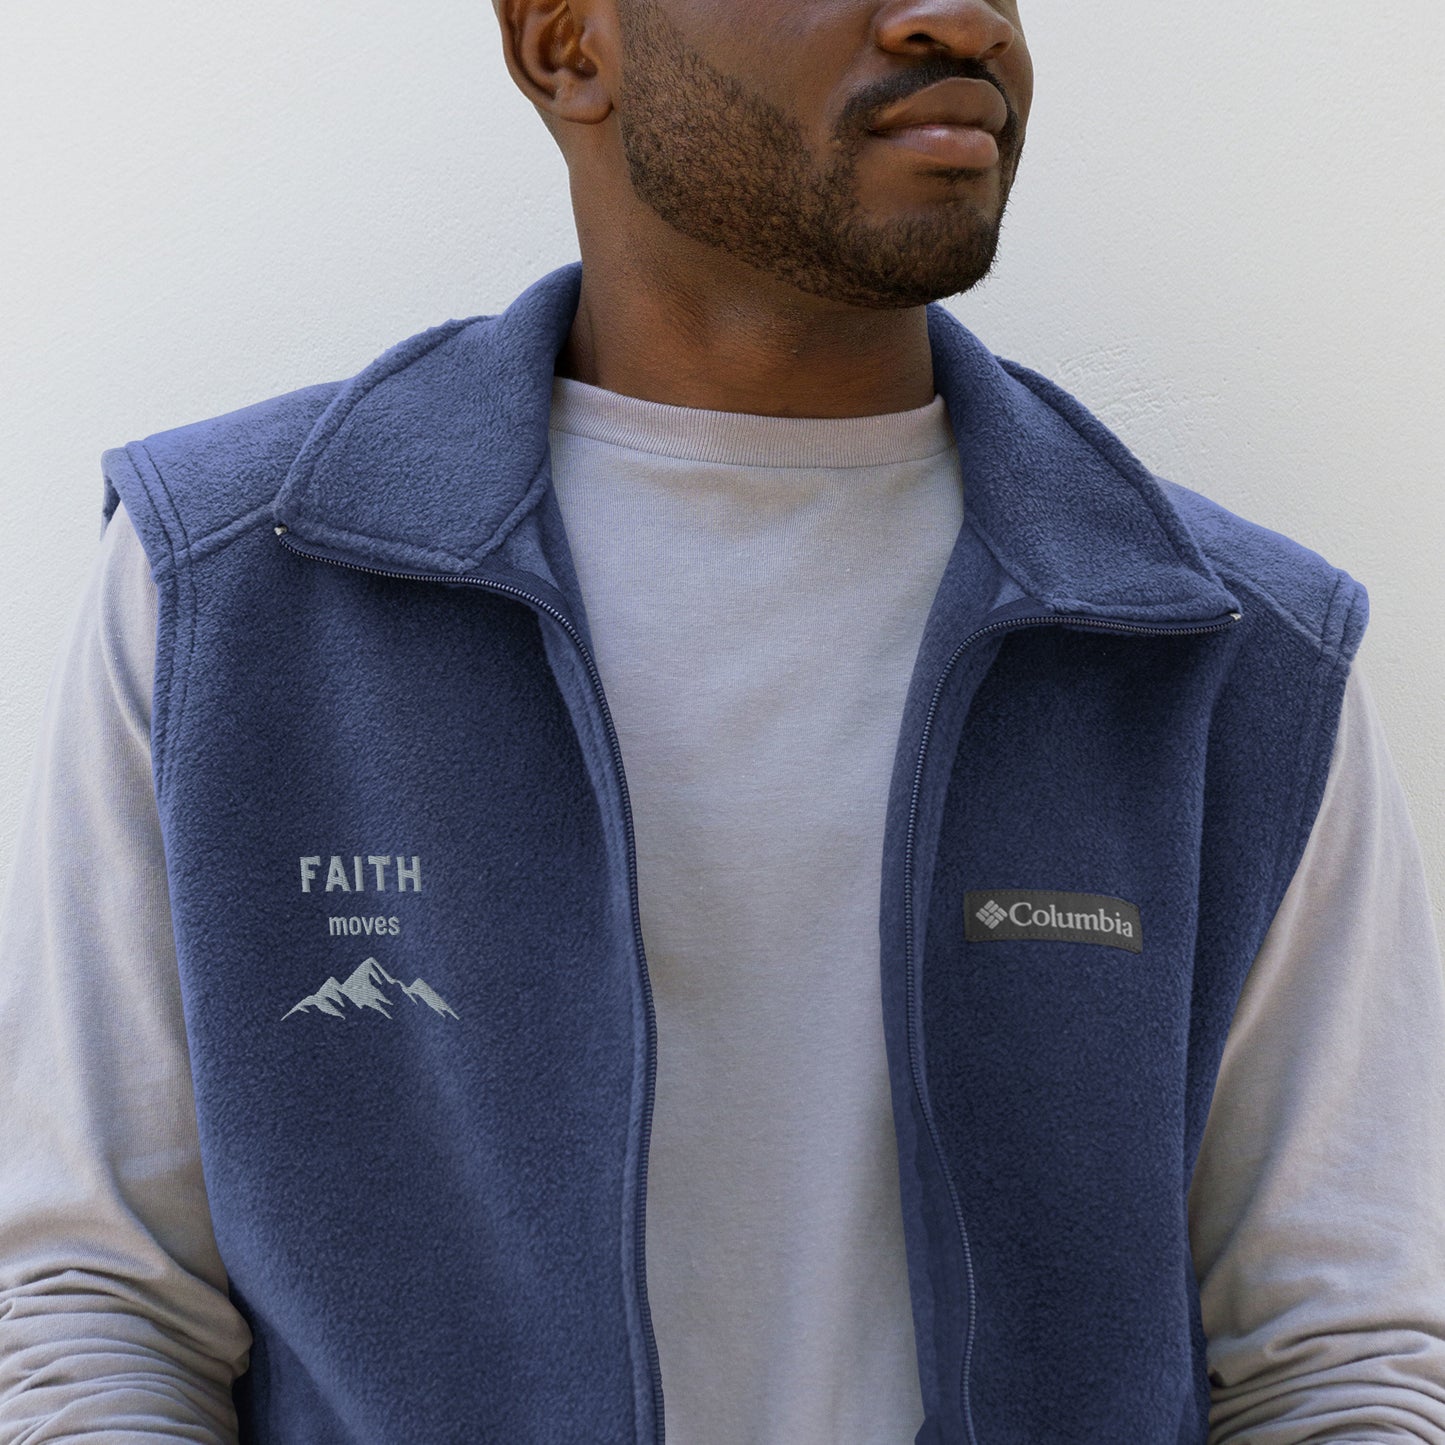 Photo of mid-section of man with facial stubble wearing long sleeve gray shirt with sleeveless Columbia fleece vest over top, embroidered on the right chest area with the words FAITH moves and a graphic of mountain peaks.